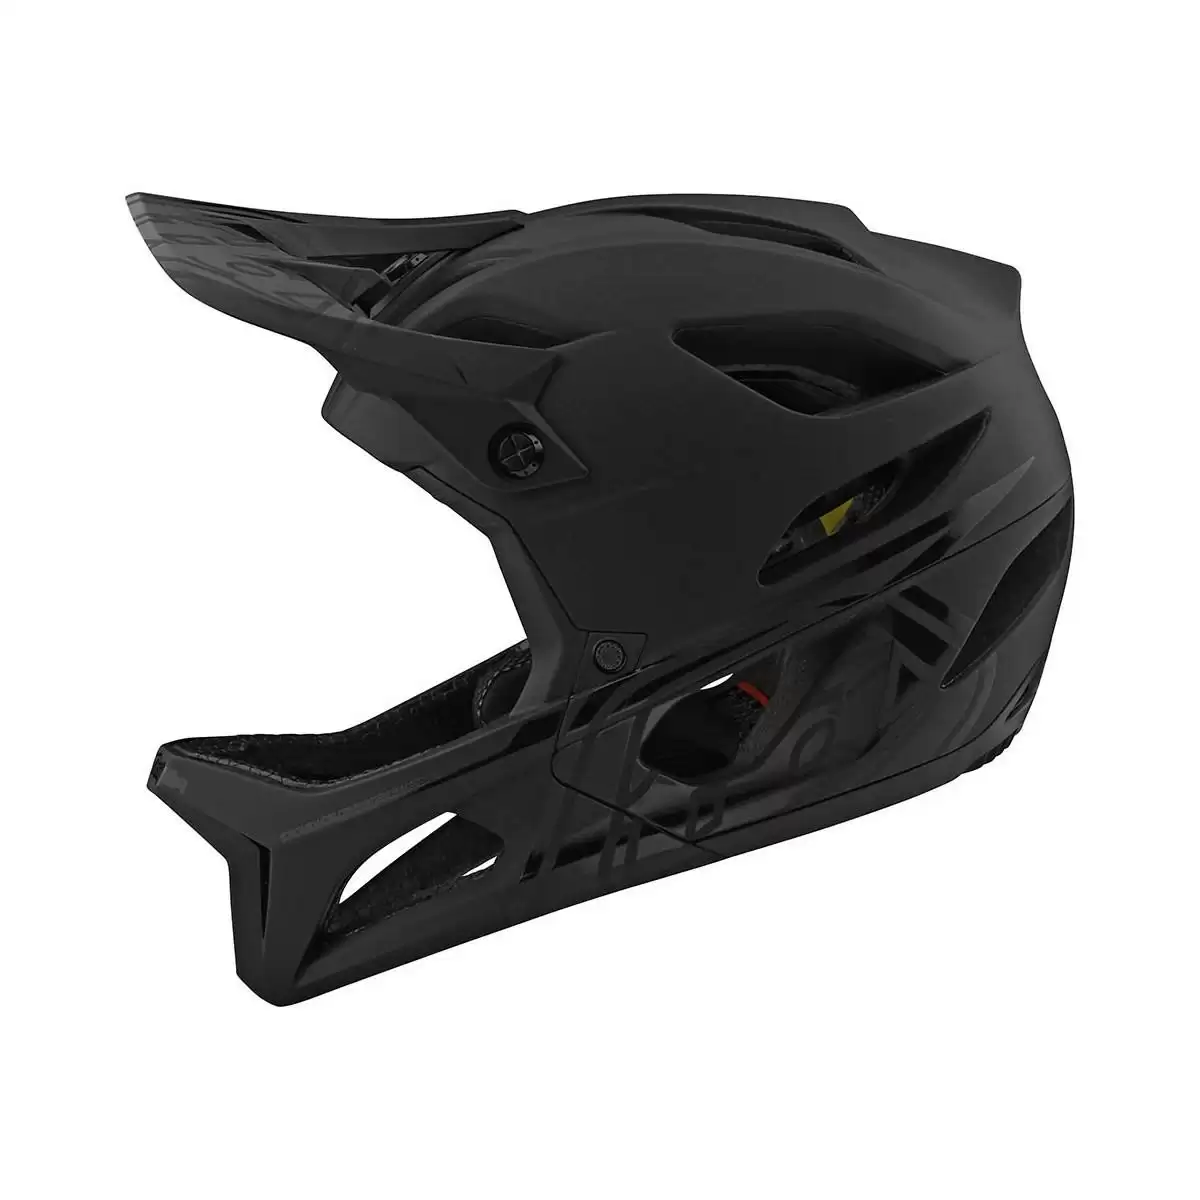 Full Face Helmet Stage MIPS Stealth Midnight Black Size M/L (57-59cm) - image